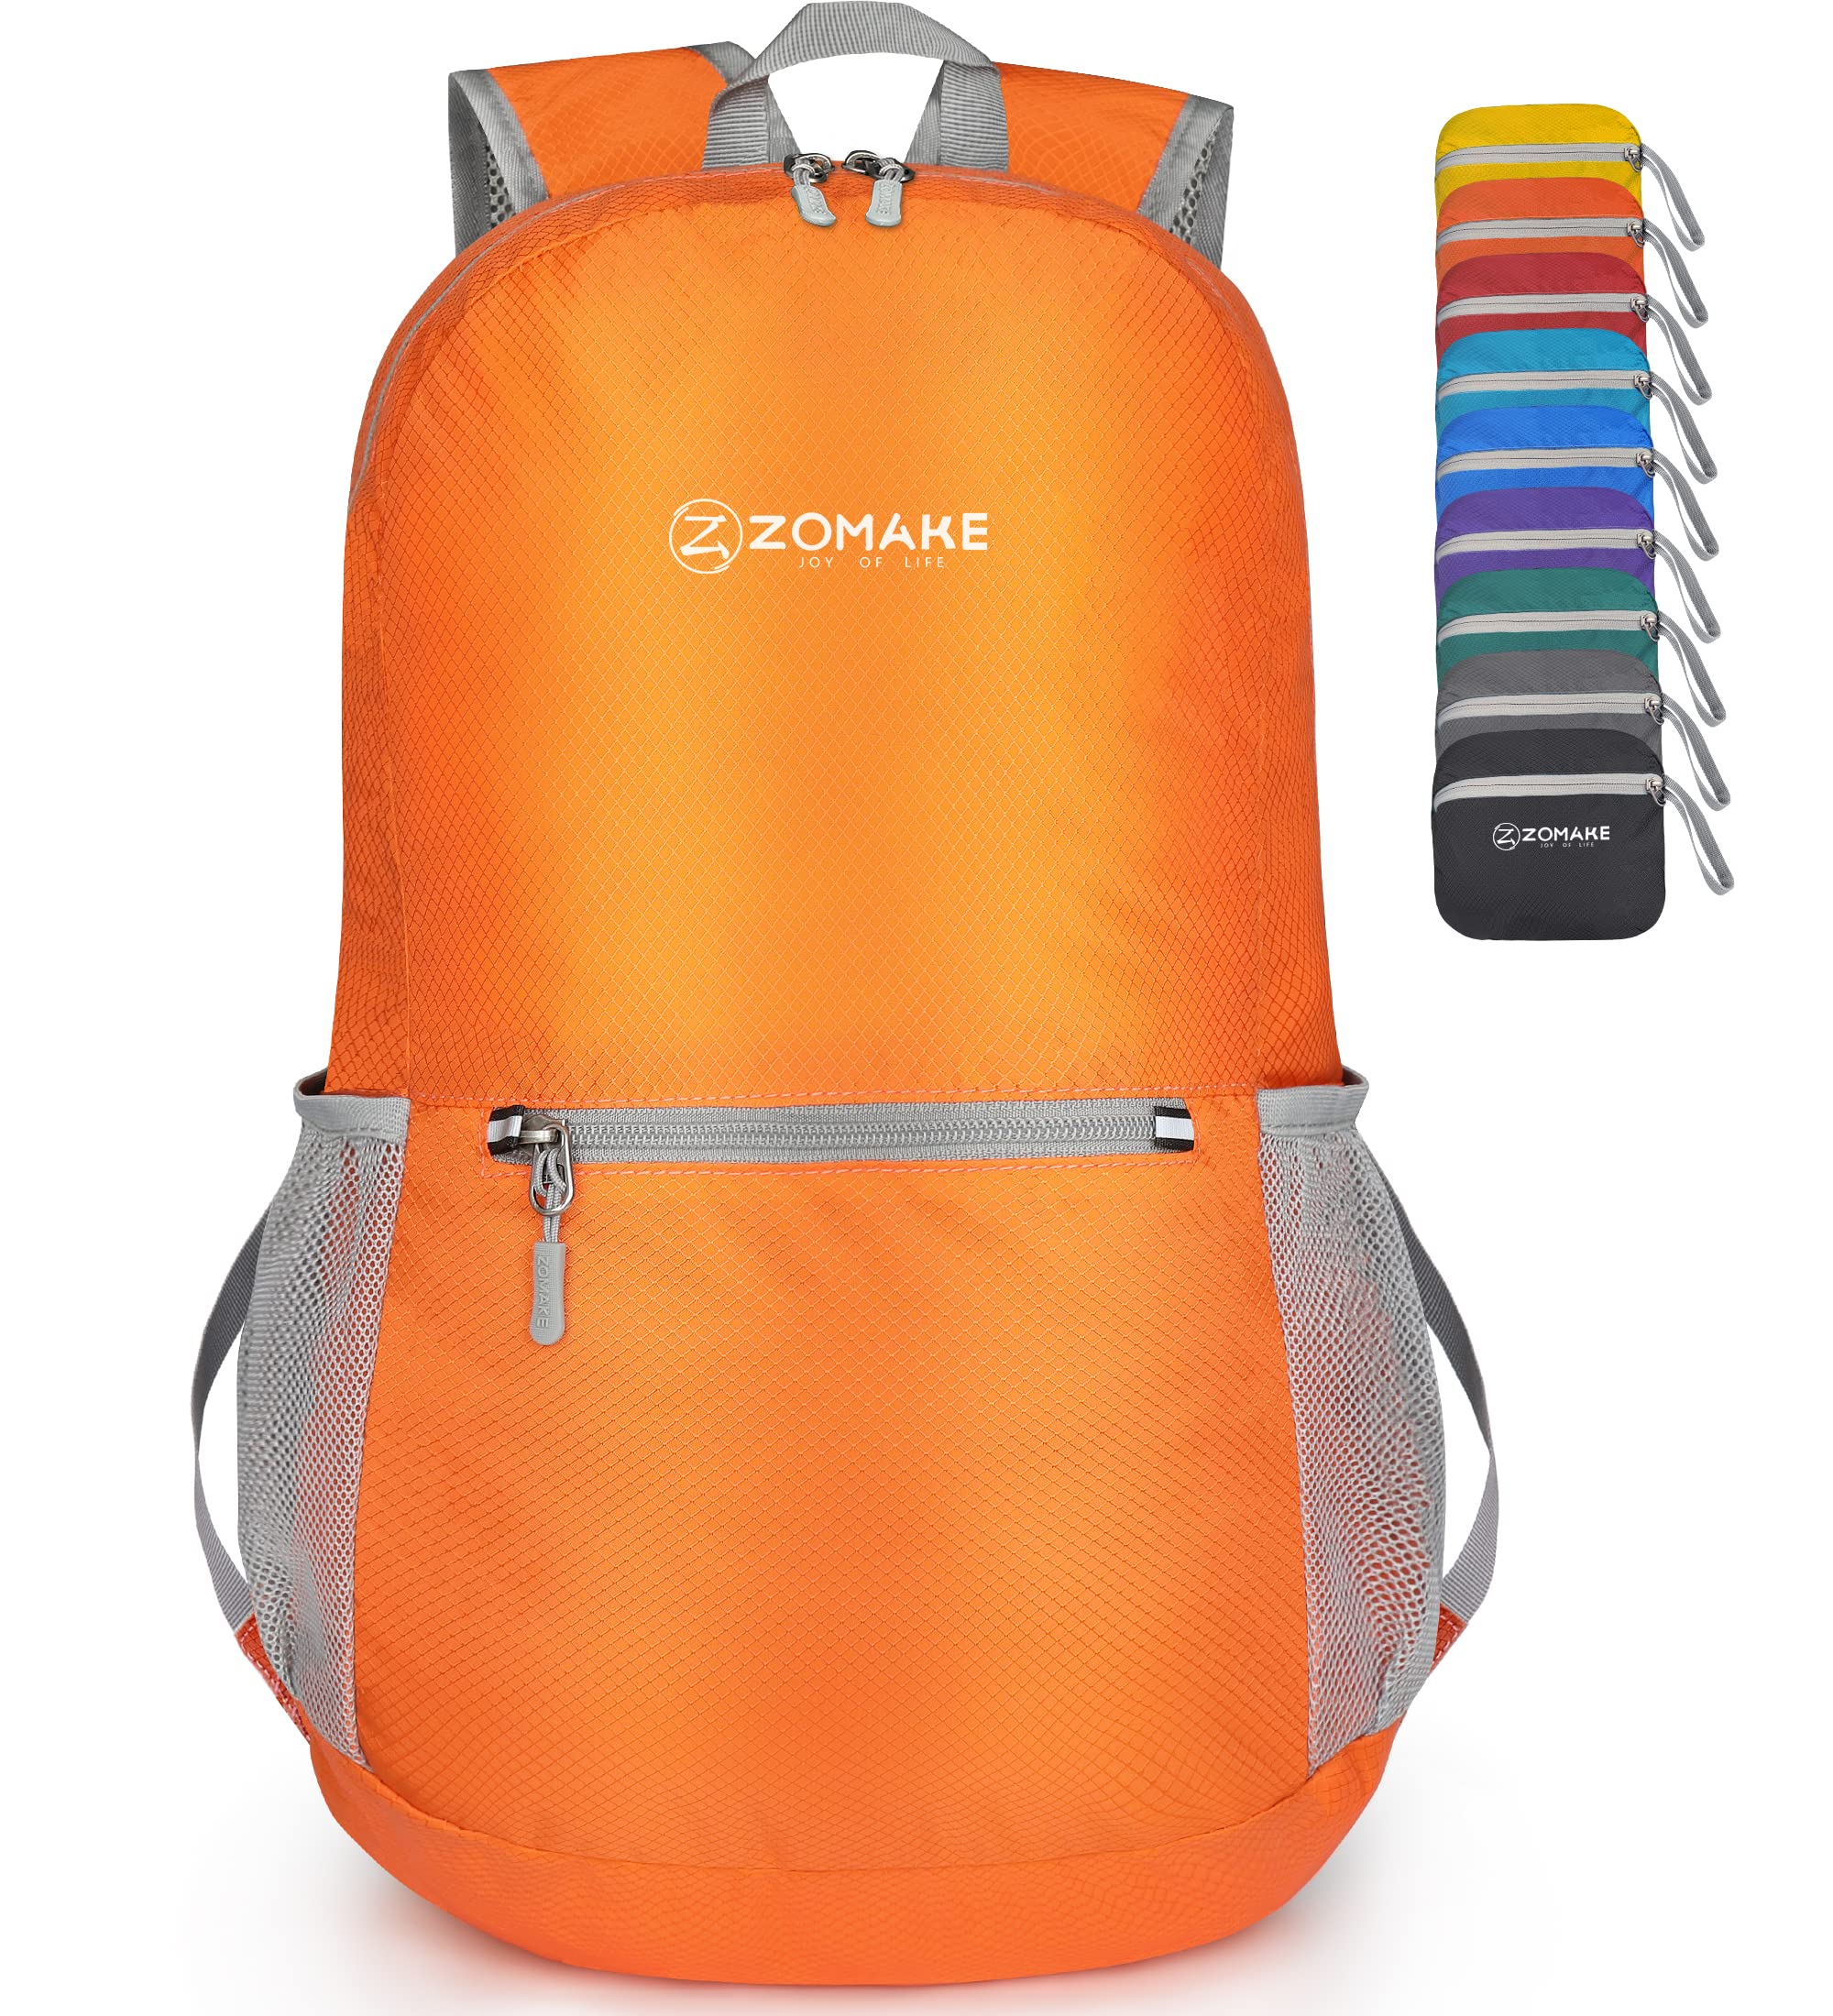 ZOMAKE Ultra Lightweight Hiking Backpack 20L - Water Resistant Small Backpack Packable Daypack for Women Men(Orange)